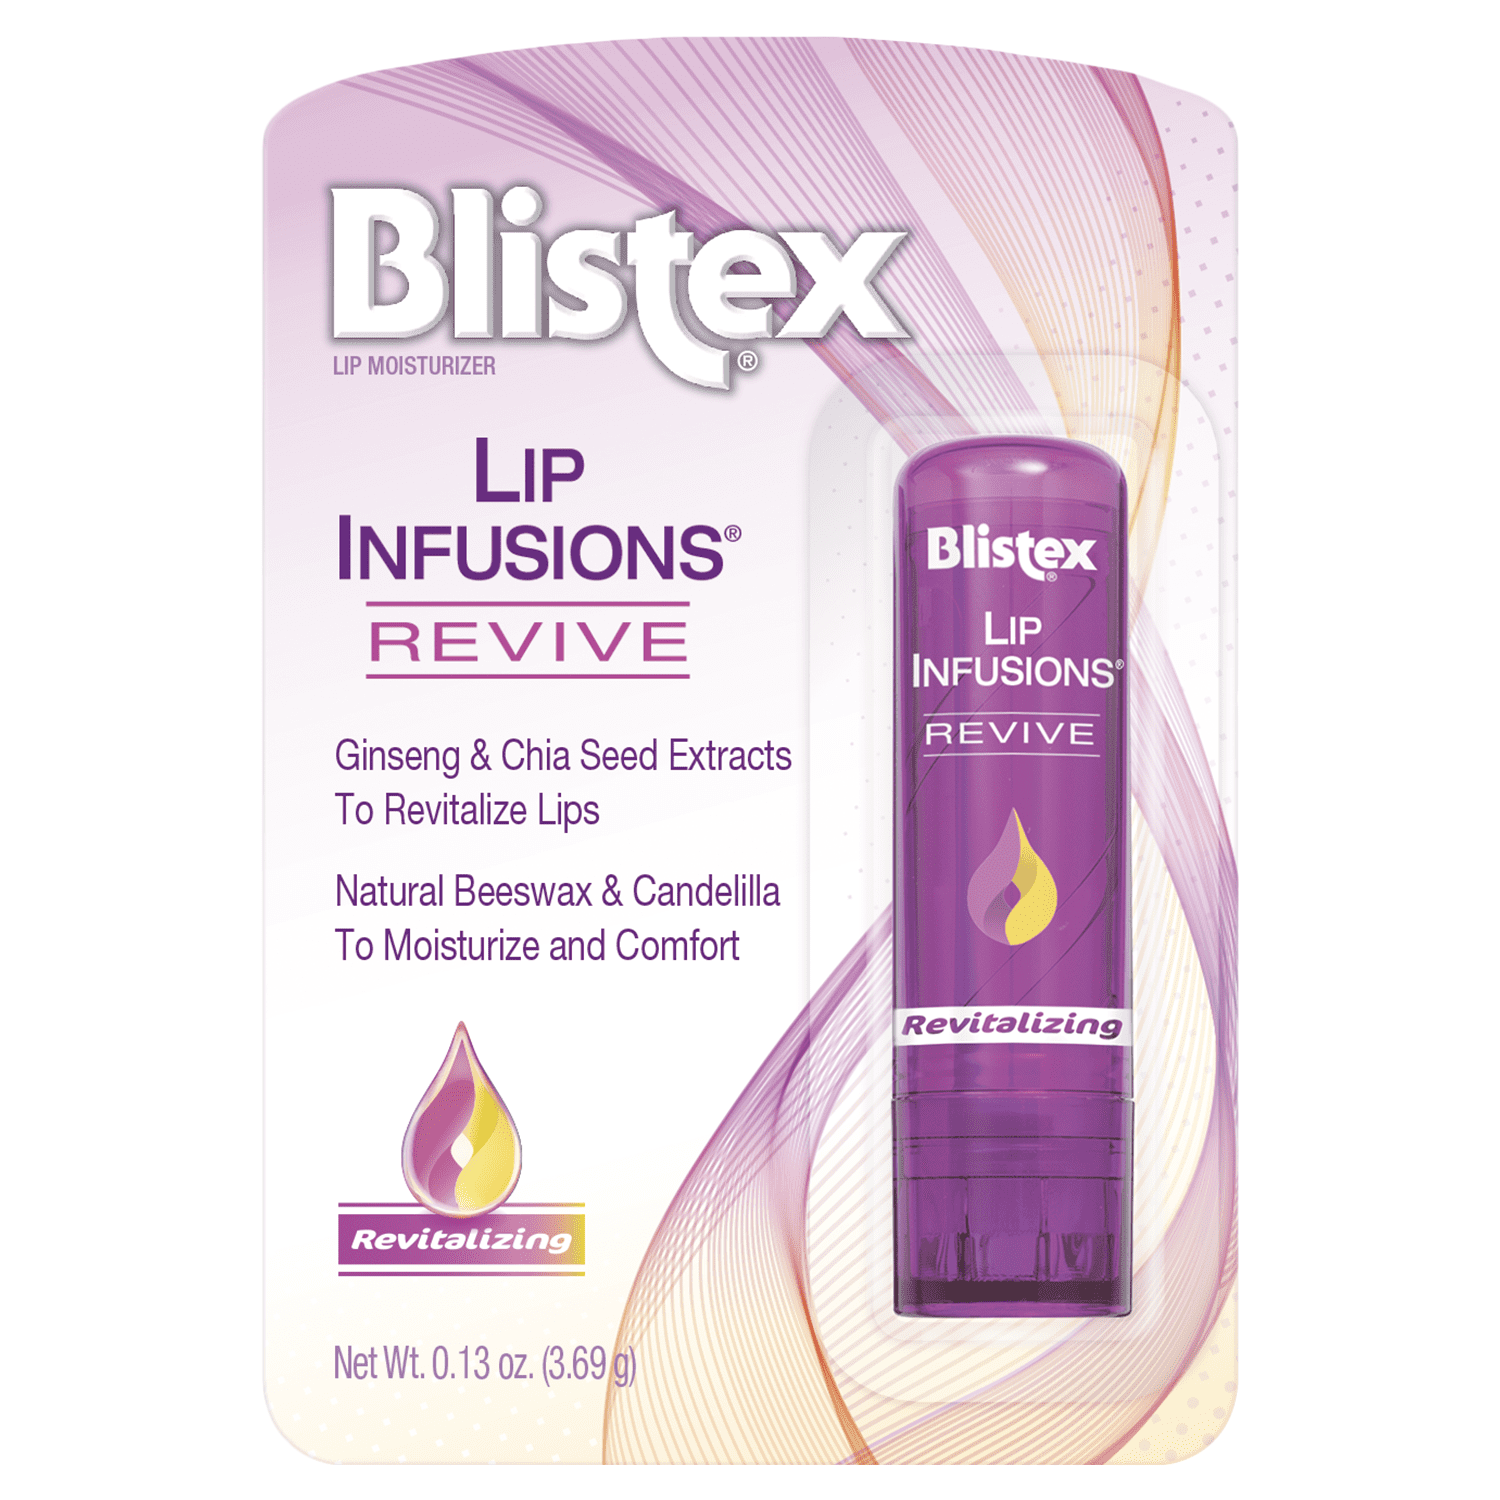 Blistex Lip Infusions Revive Lip Balm with Ginseng & Chia Seed Extracts